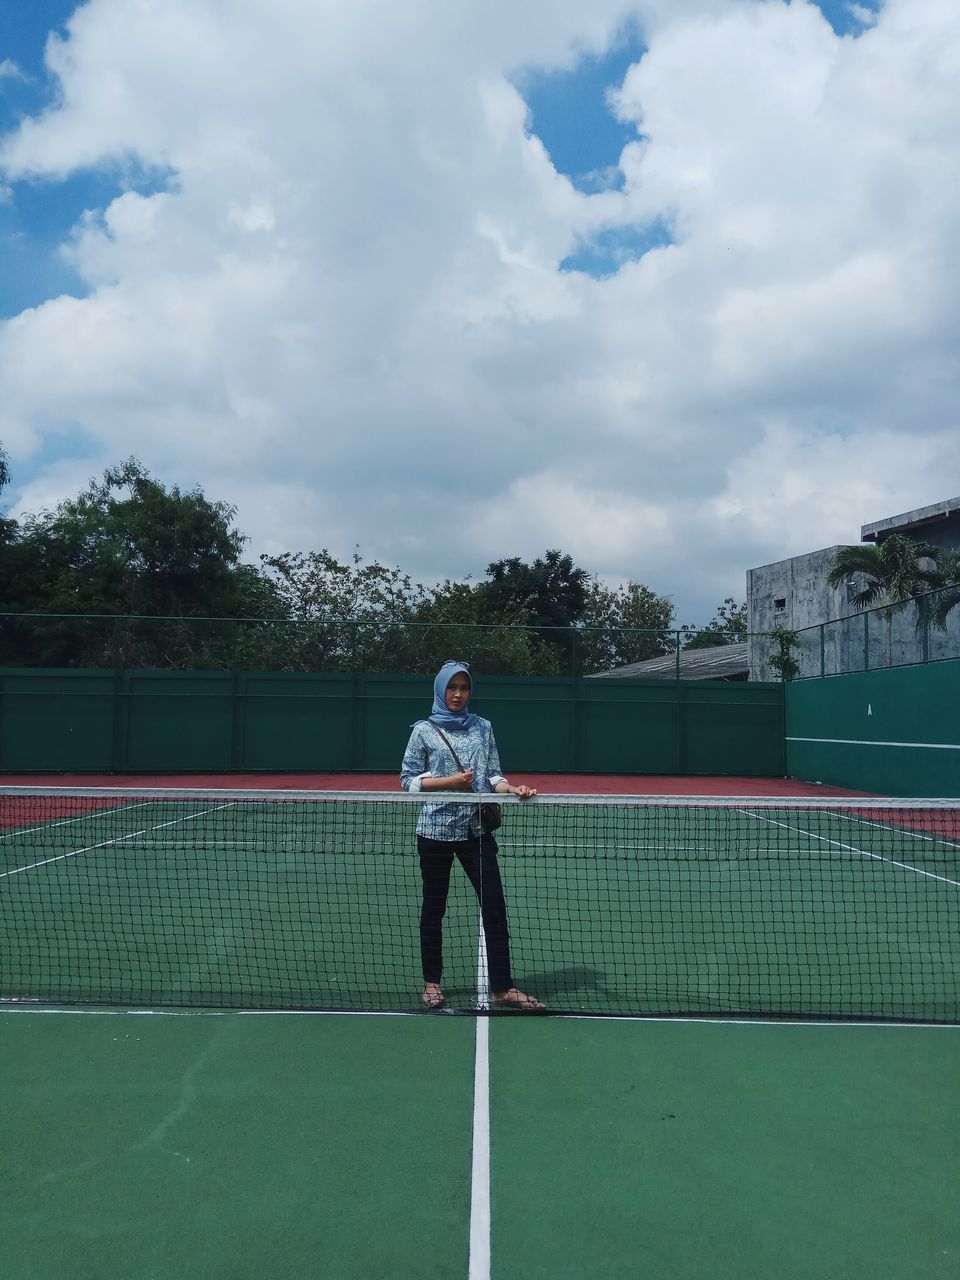 sport, playing, tennis, cloud - sky, leisure activity, real people, tennis racket, sky, lifestyles, court, full length, tennis ball, one person, outdoors, boys, day, standing, tennis net, childhood, ball, sports clothing, racket sport, tree, sportsman, young adult, people